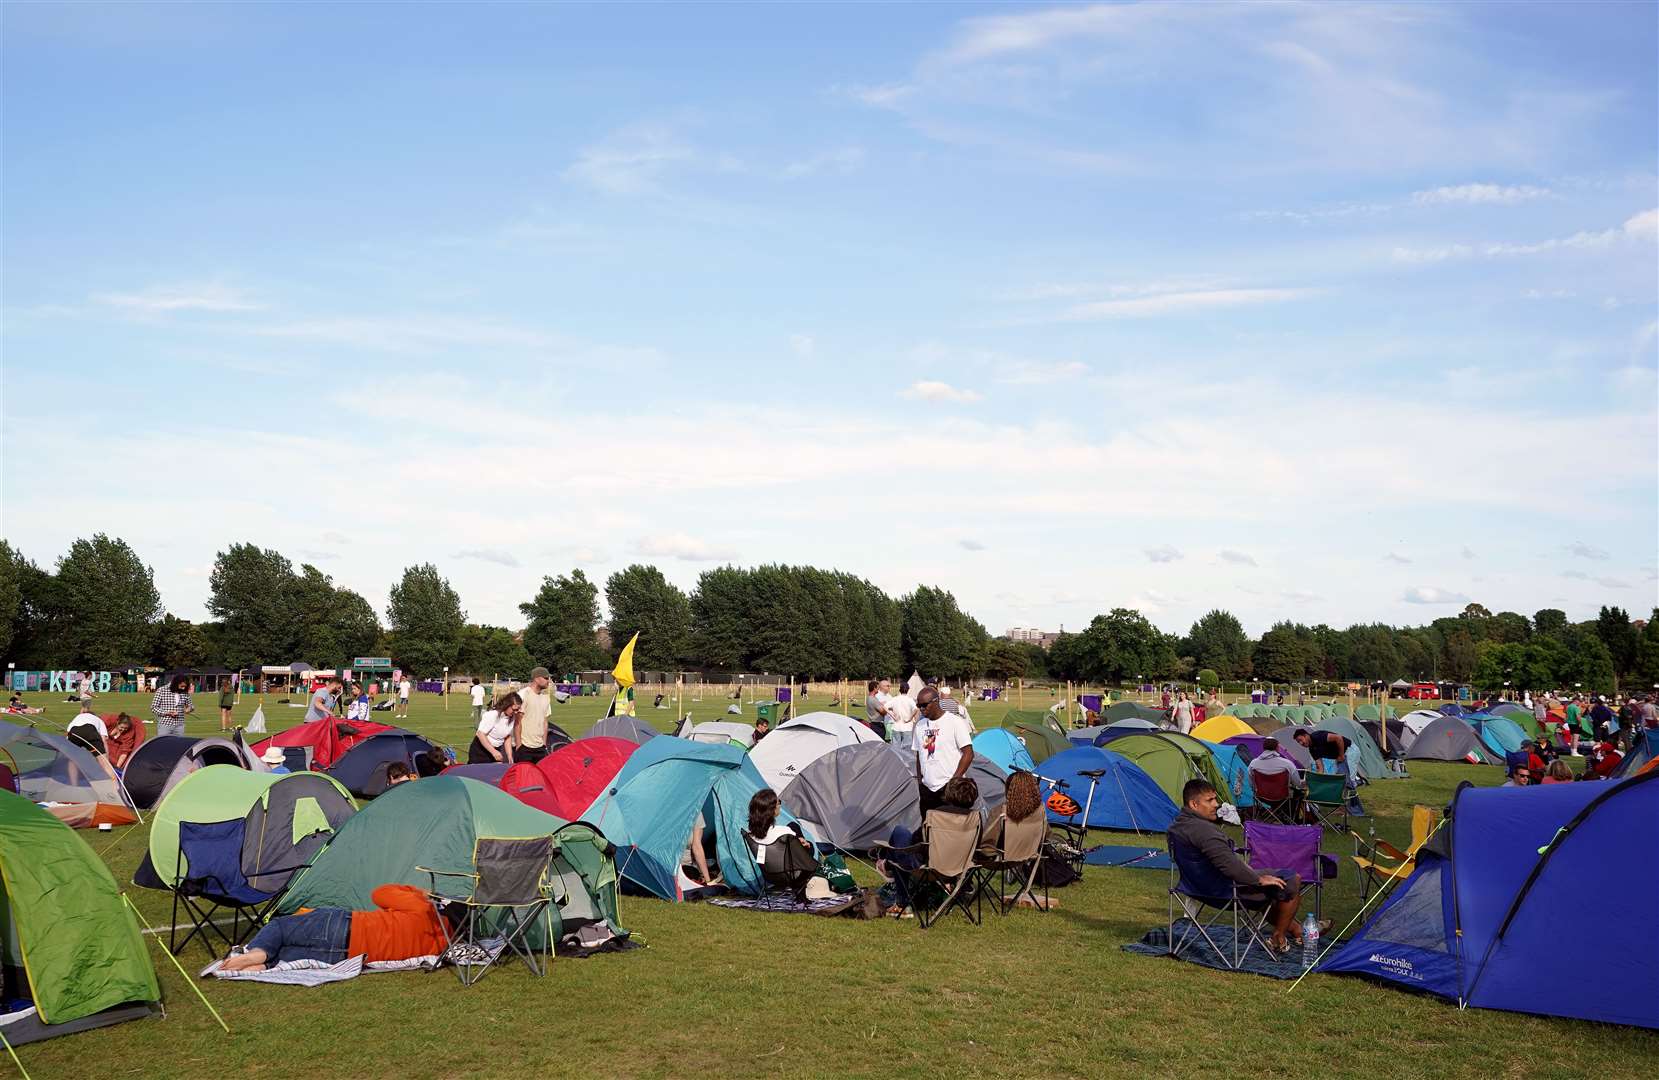 Campers form the overnight queue ahead of the 2022 Wimbledon Championship (Zac Goodwin/PA)